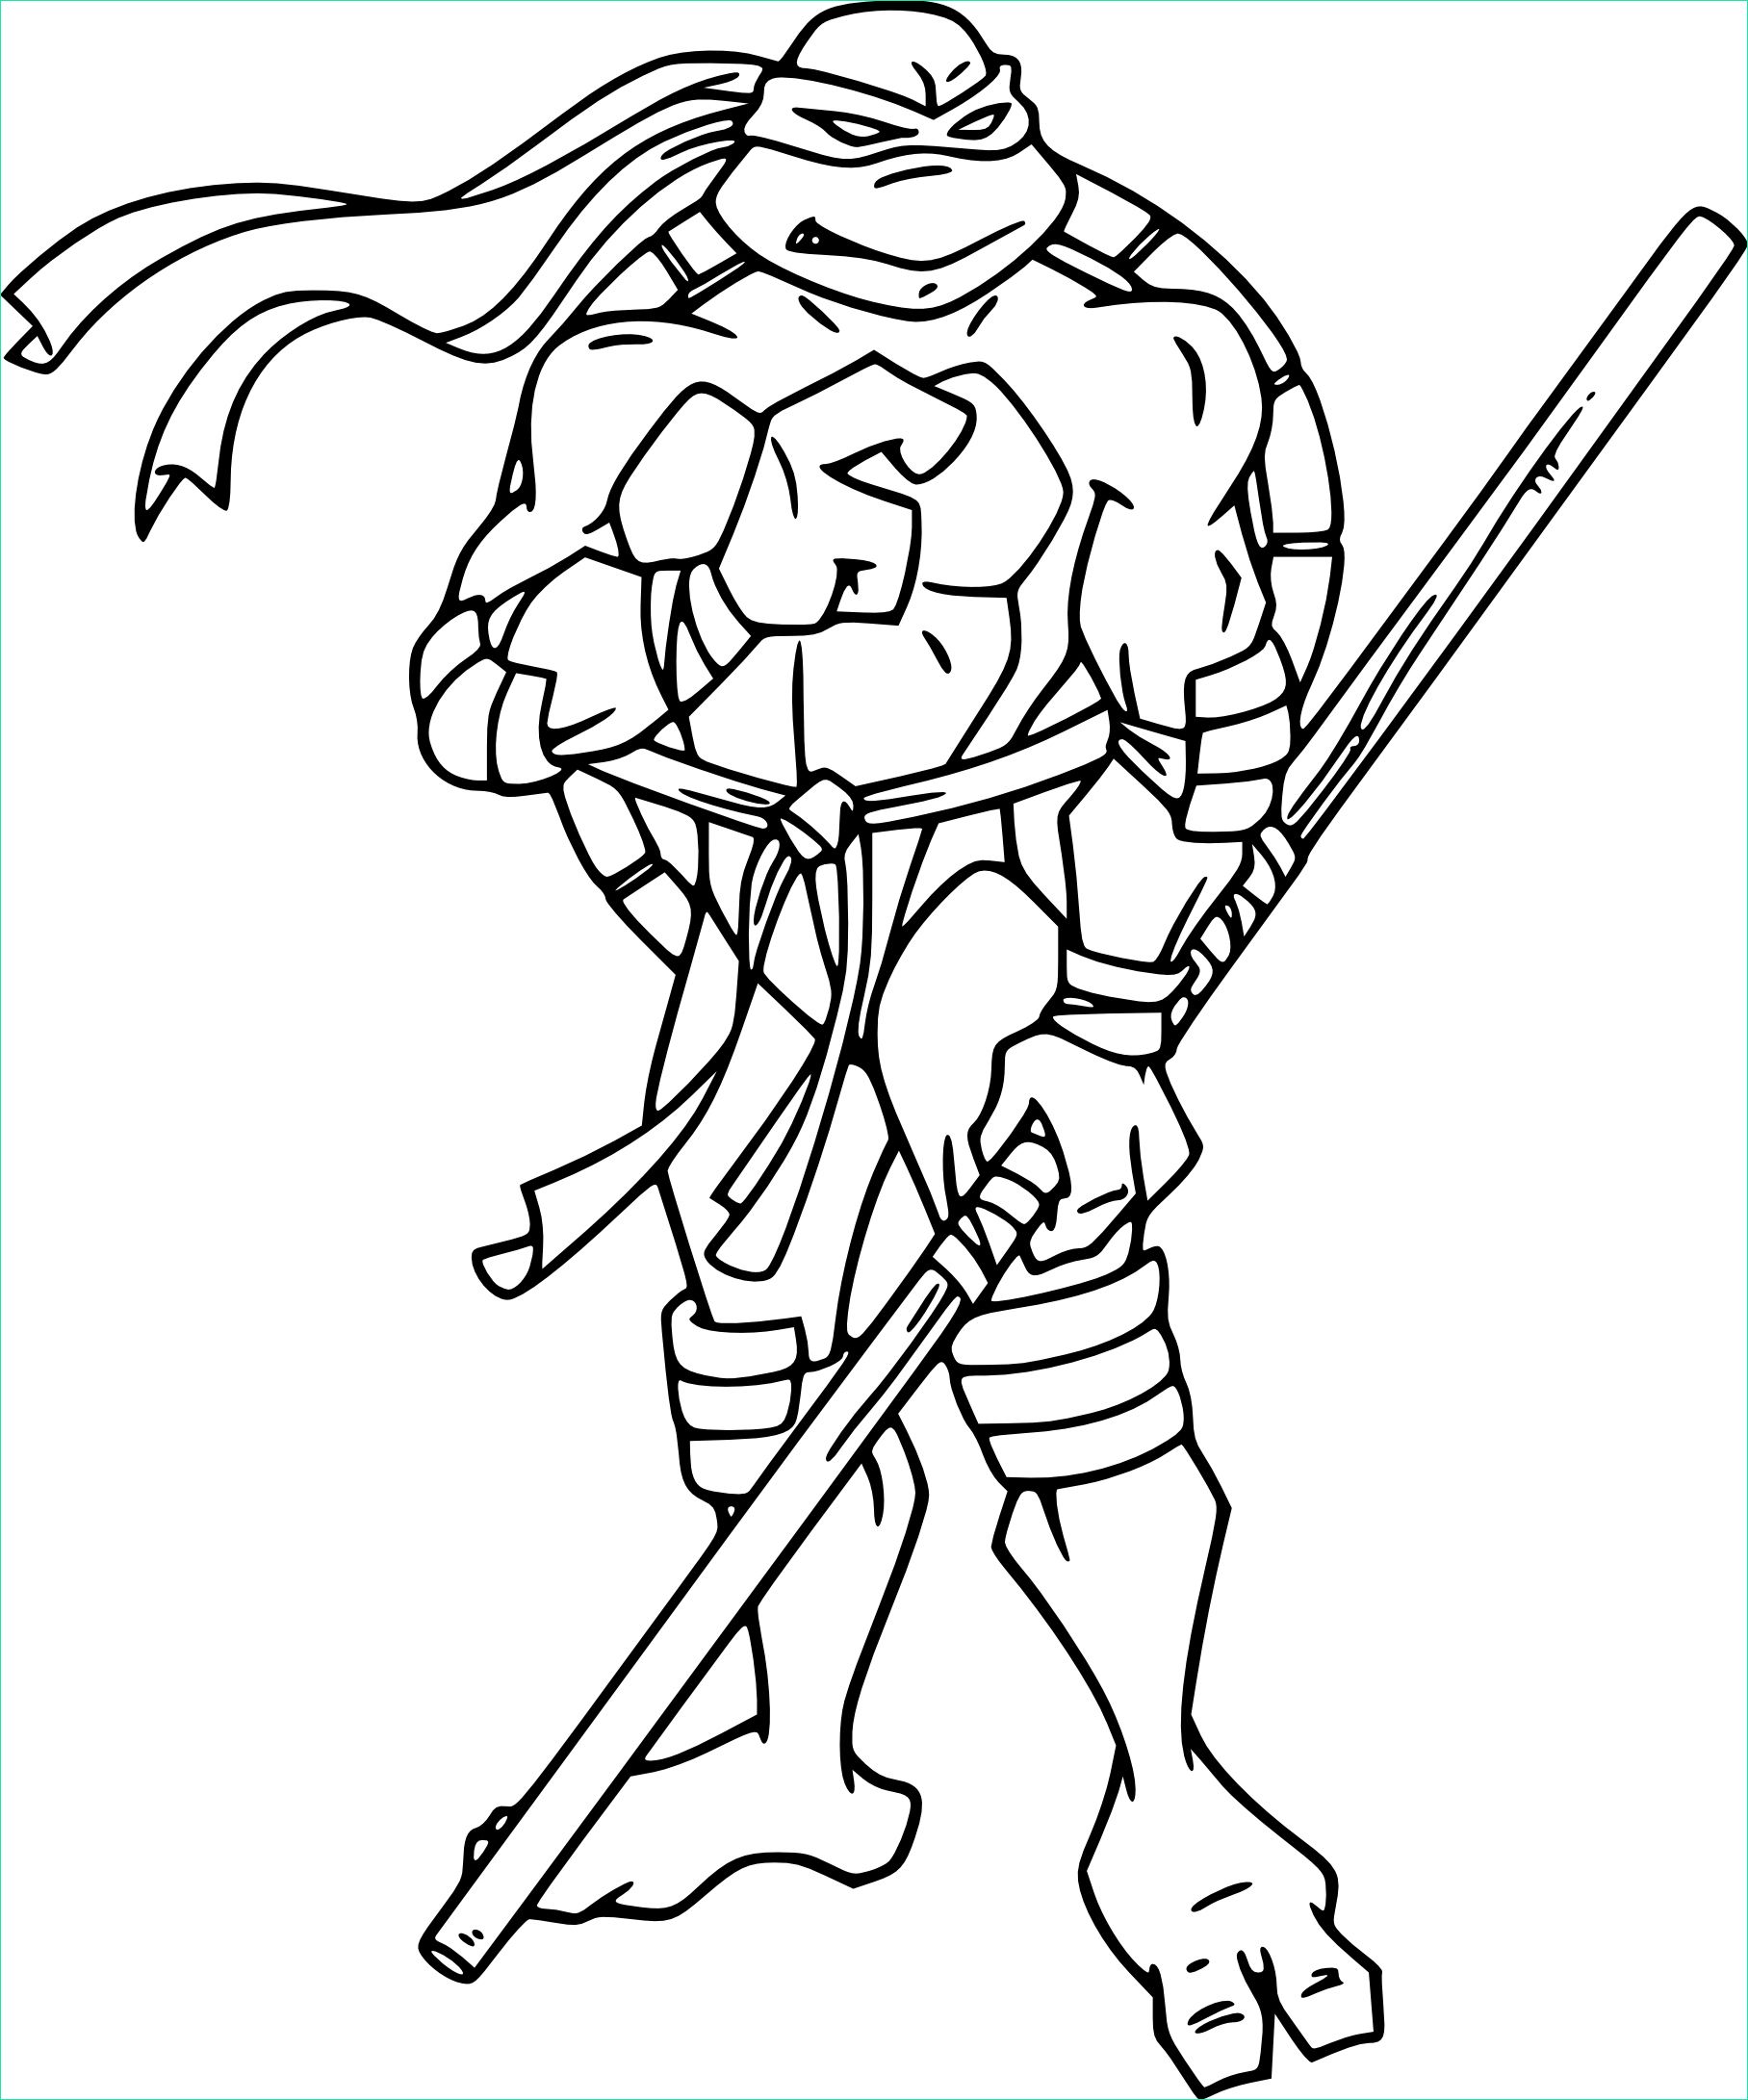 Coloriage tortues Ninja Impressionnant Photos Turtle From Finding Nemo Coloring Page Sketch Coloring Page